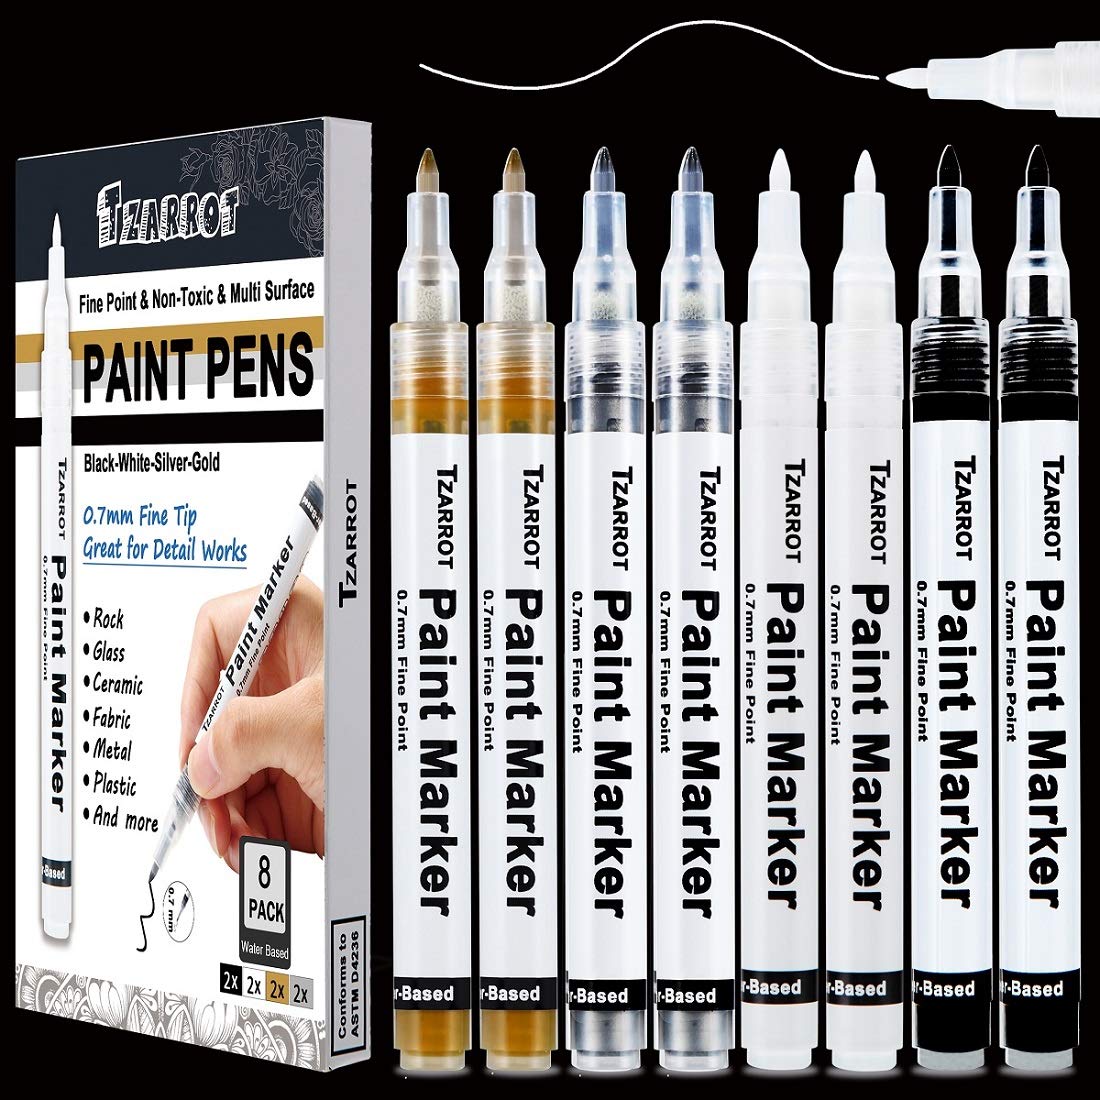 Gold Marker Paint Pens - 6 Pack Acrylic Gold Permanent Marker, 0.7mm Extra  Fine Tip Paint Pen for Art projects, Drawing, Rock Painting, Stone